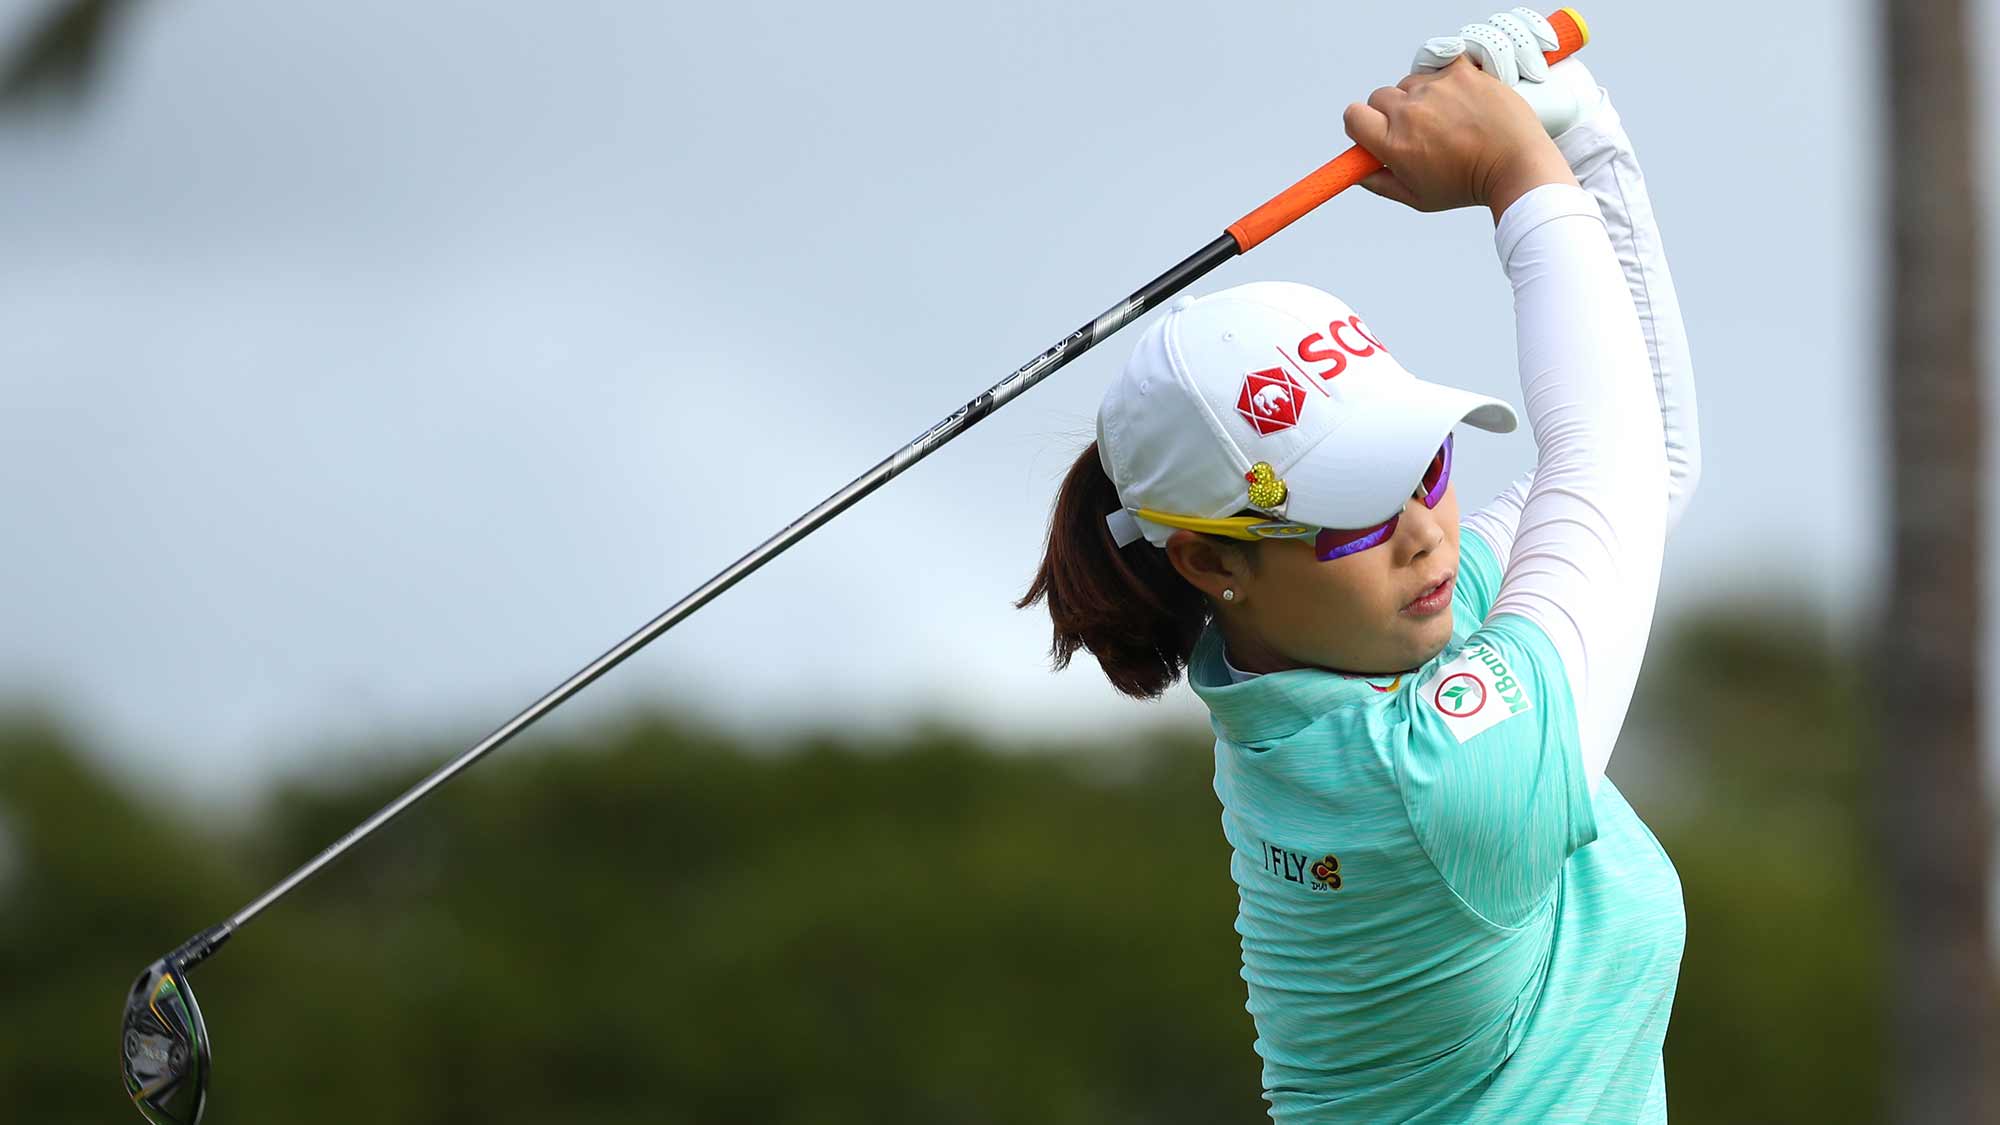 Moriya Jutanugarn of Thailand watches her tee shot on the second hole during the first round of the LOTTE Championship on April 18, 2019 in Kapolei, Hawaii. 